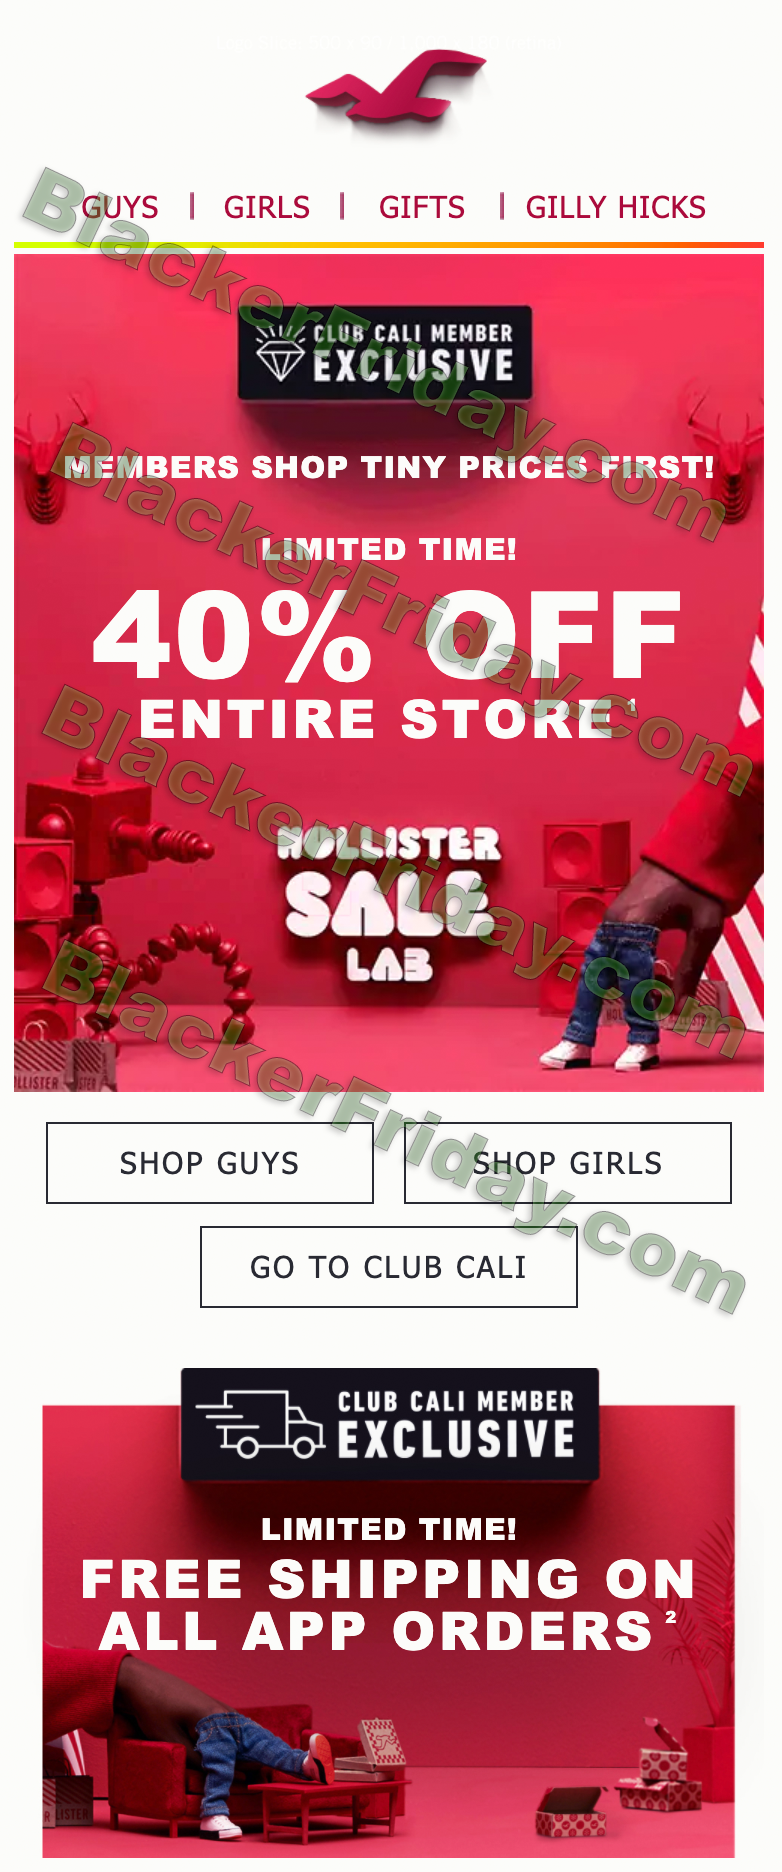 is hollister having a sale on jeans